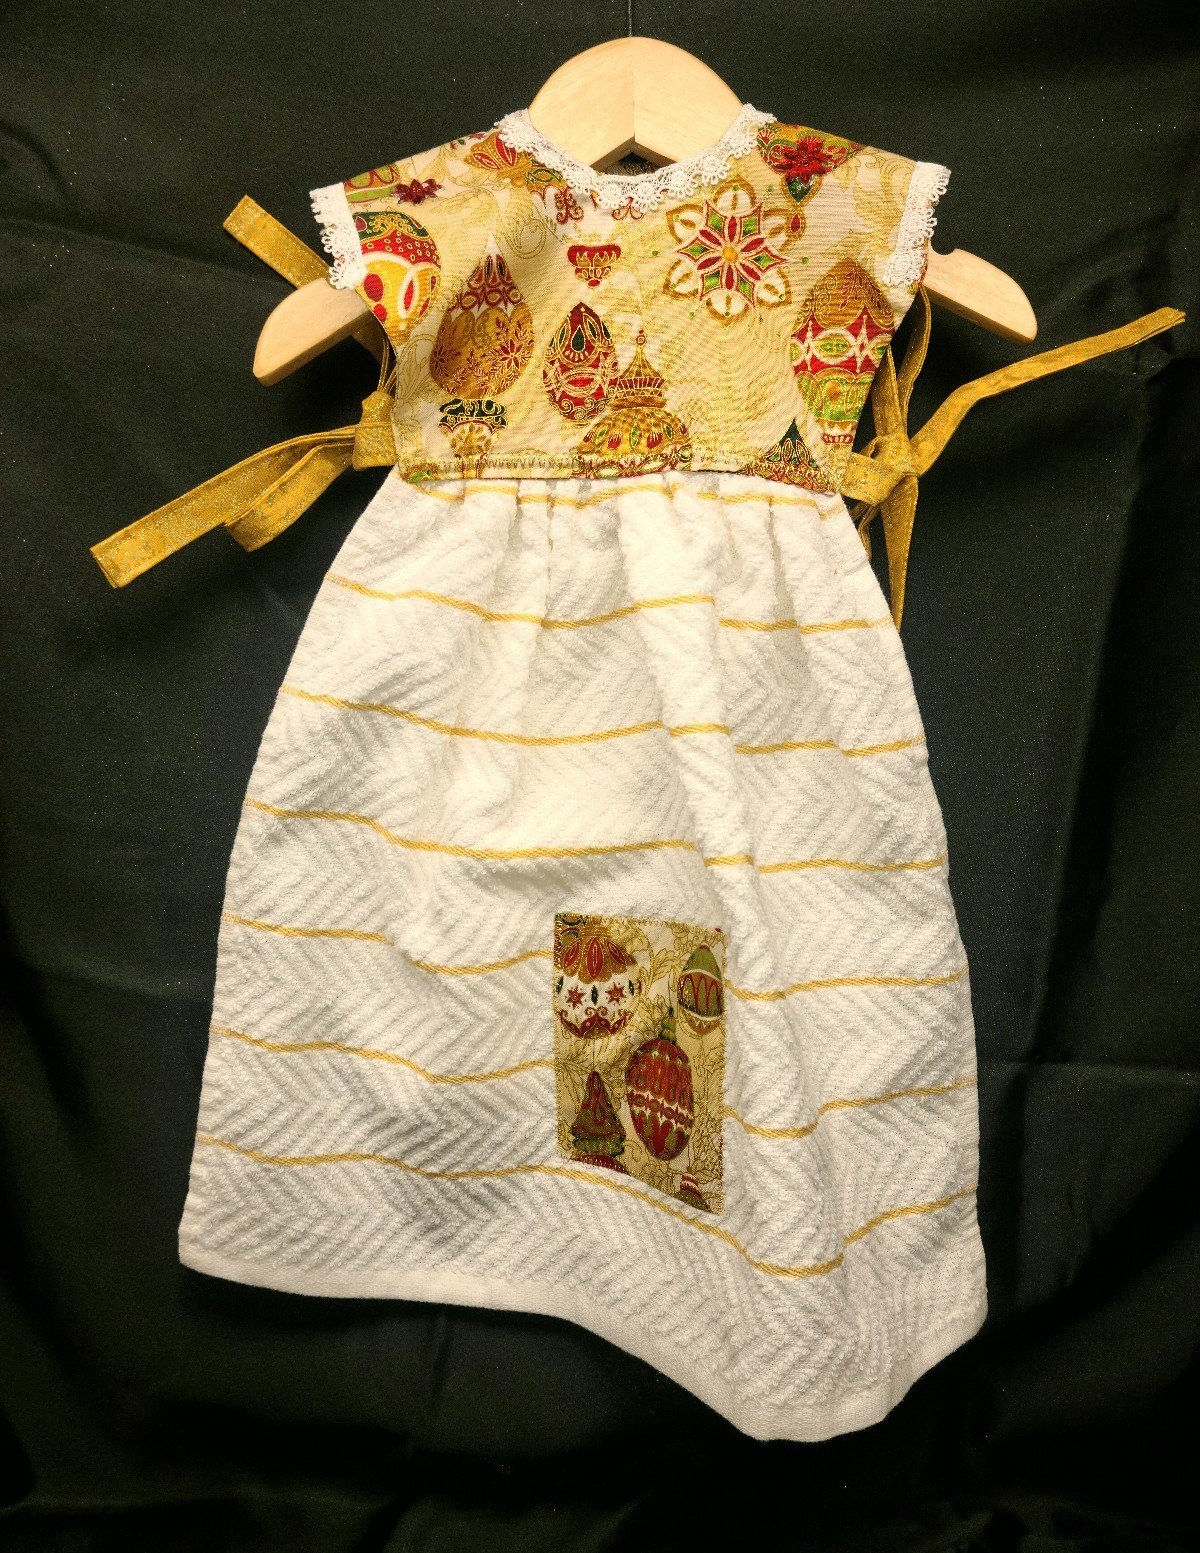 Country Christmas Apron Dress Dish Towel Kitchen Hand Made Oven Door K2g5qIe7z